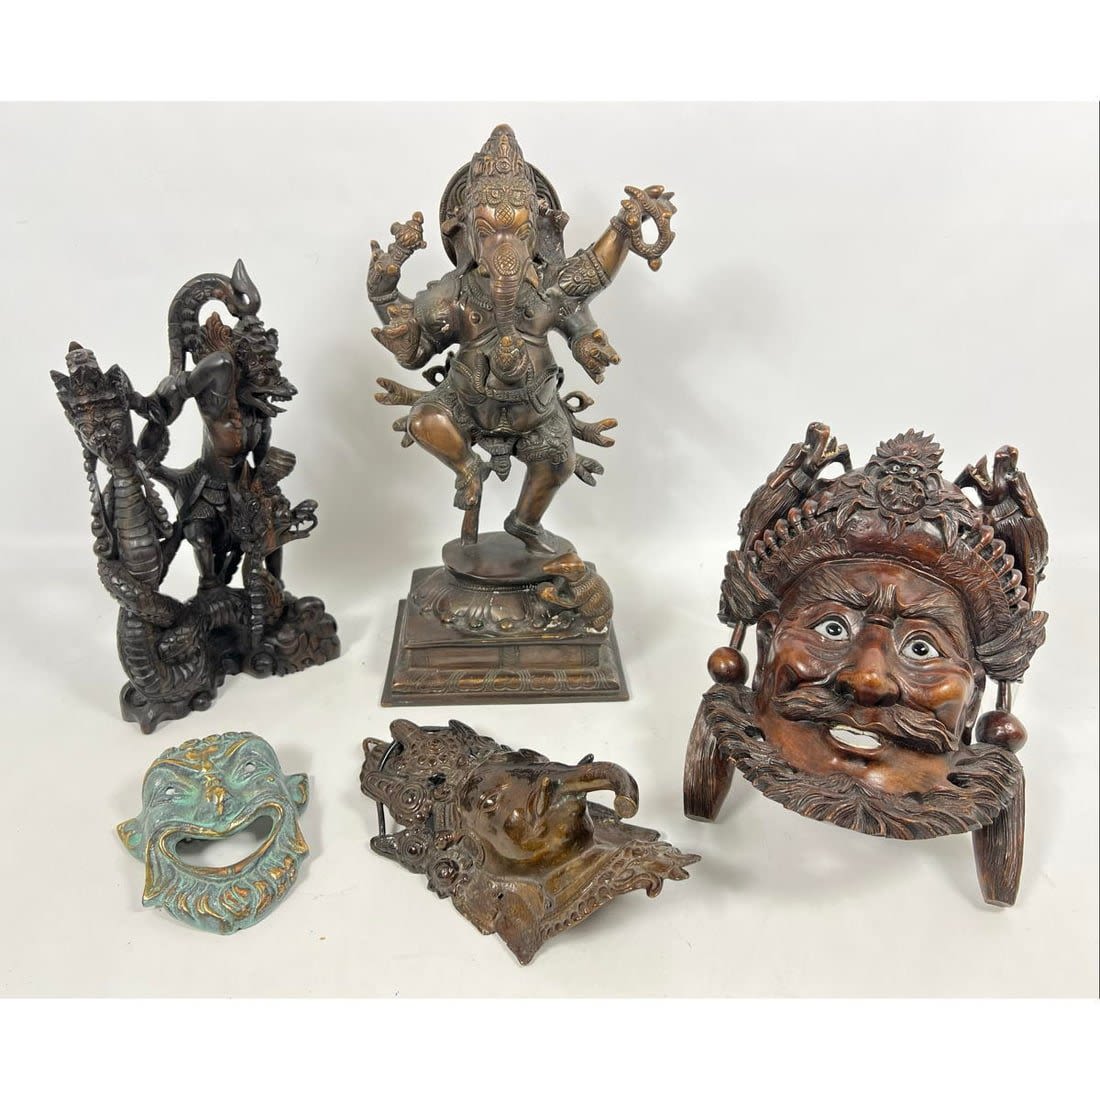 Collection of 5 Mixed Material